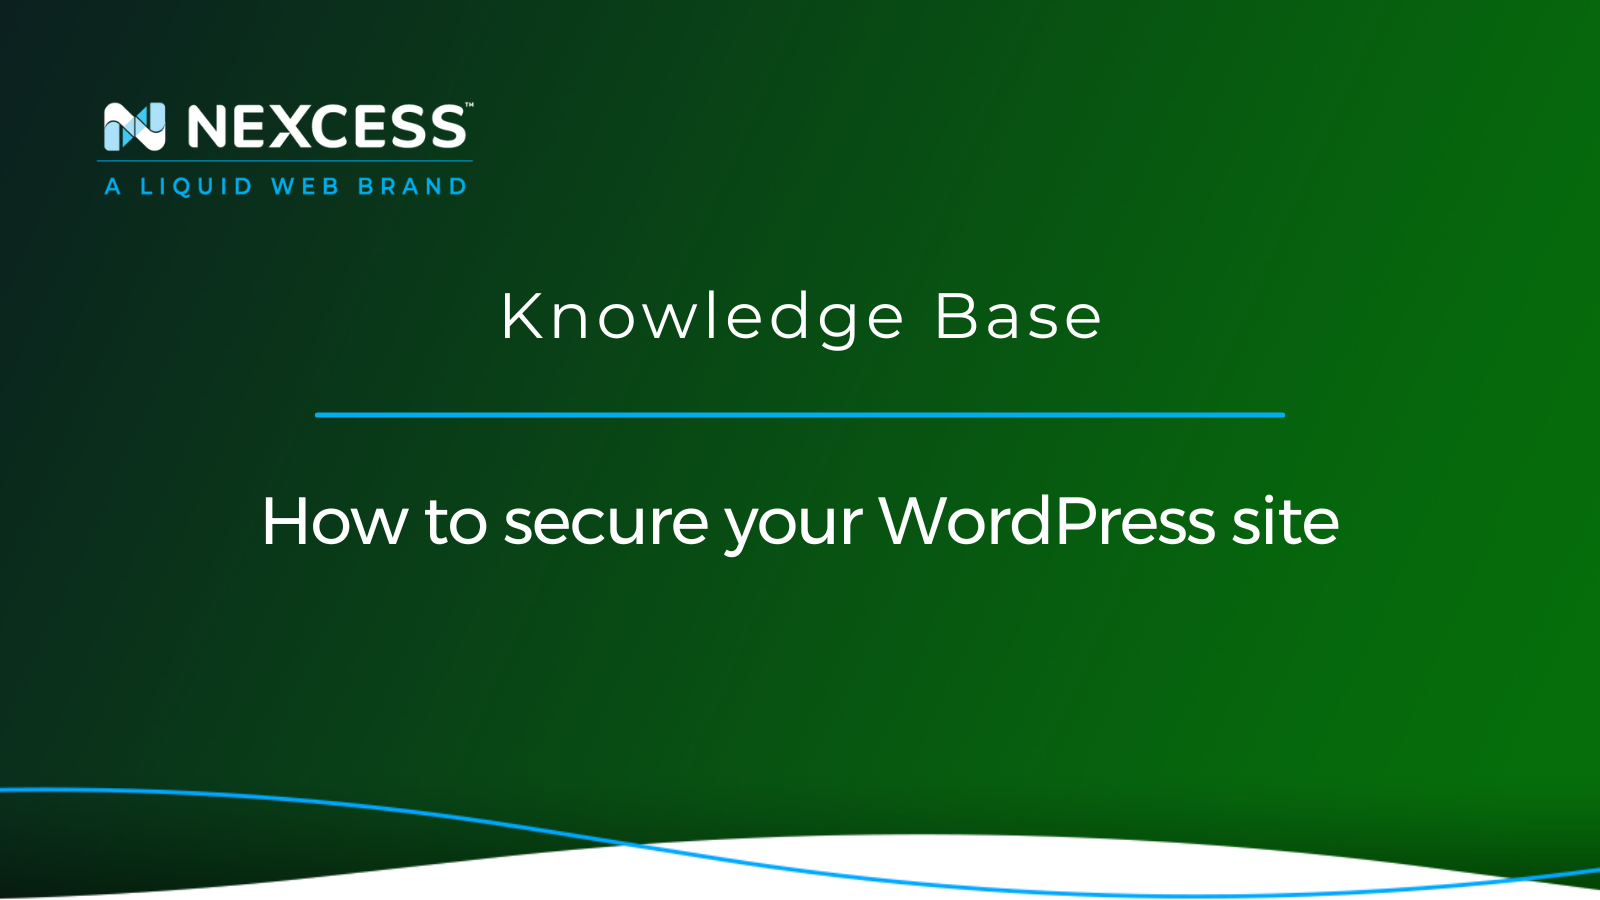 How to secure your WordPress site